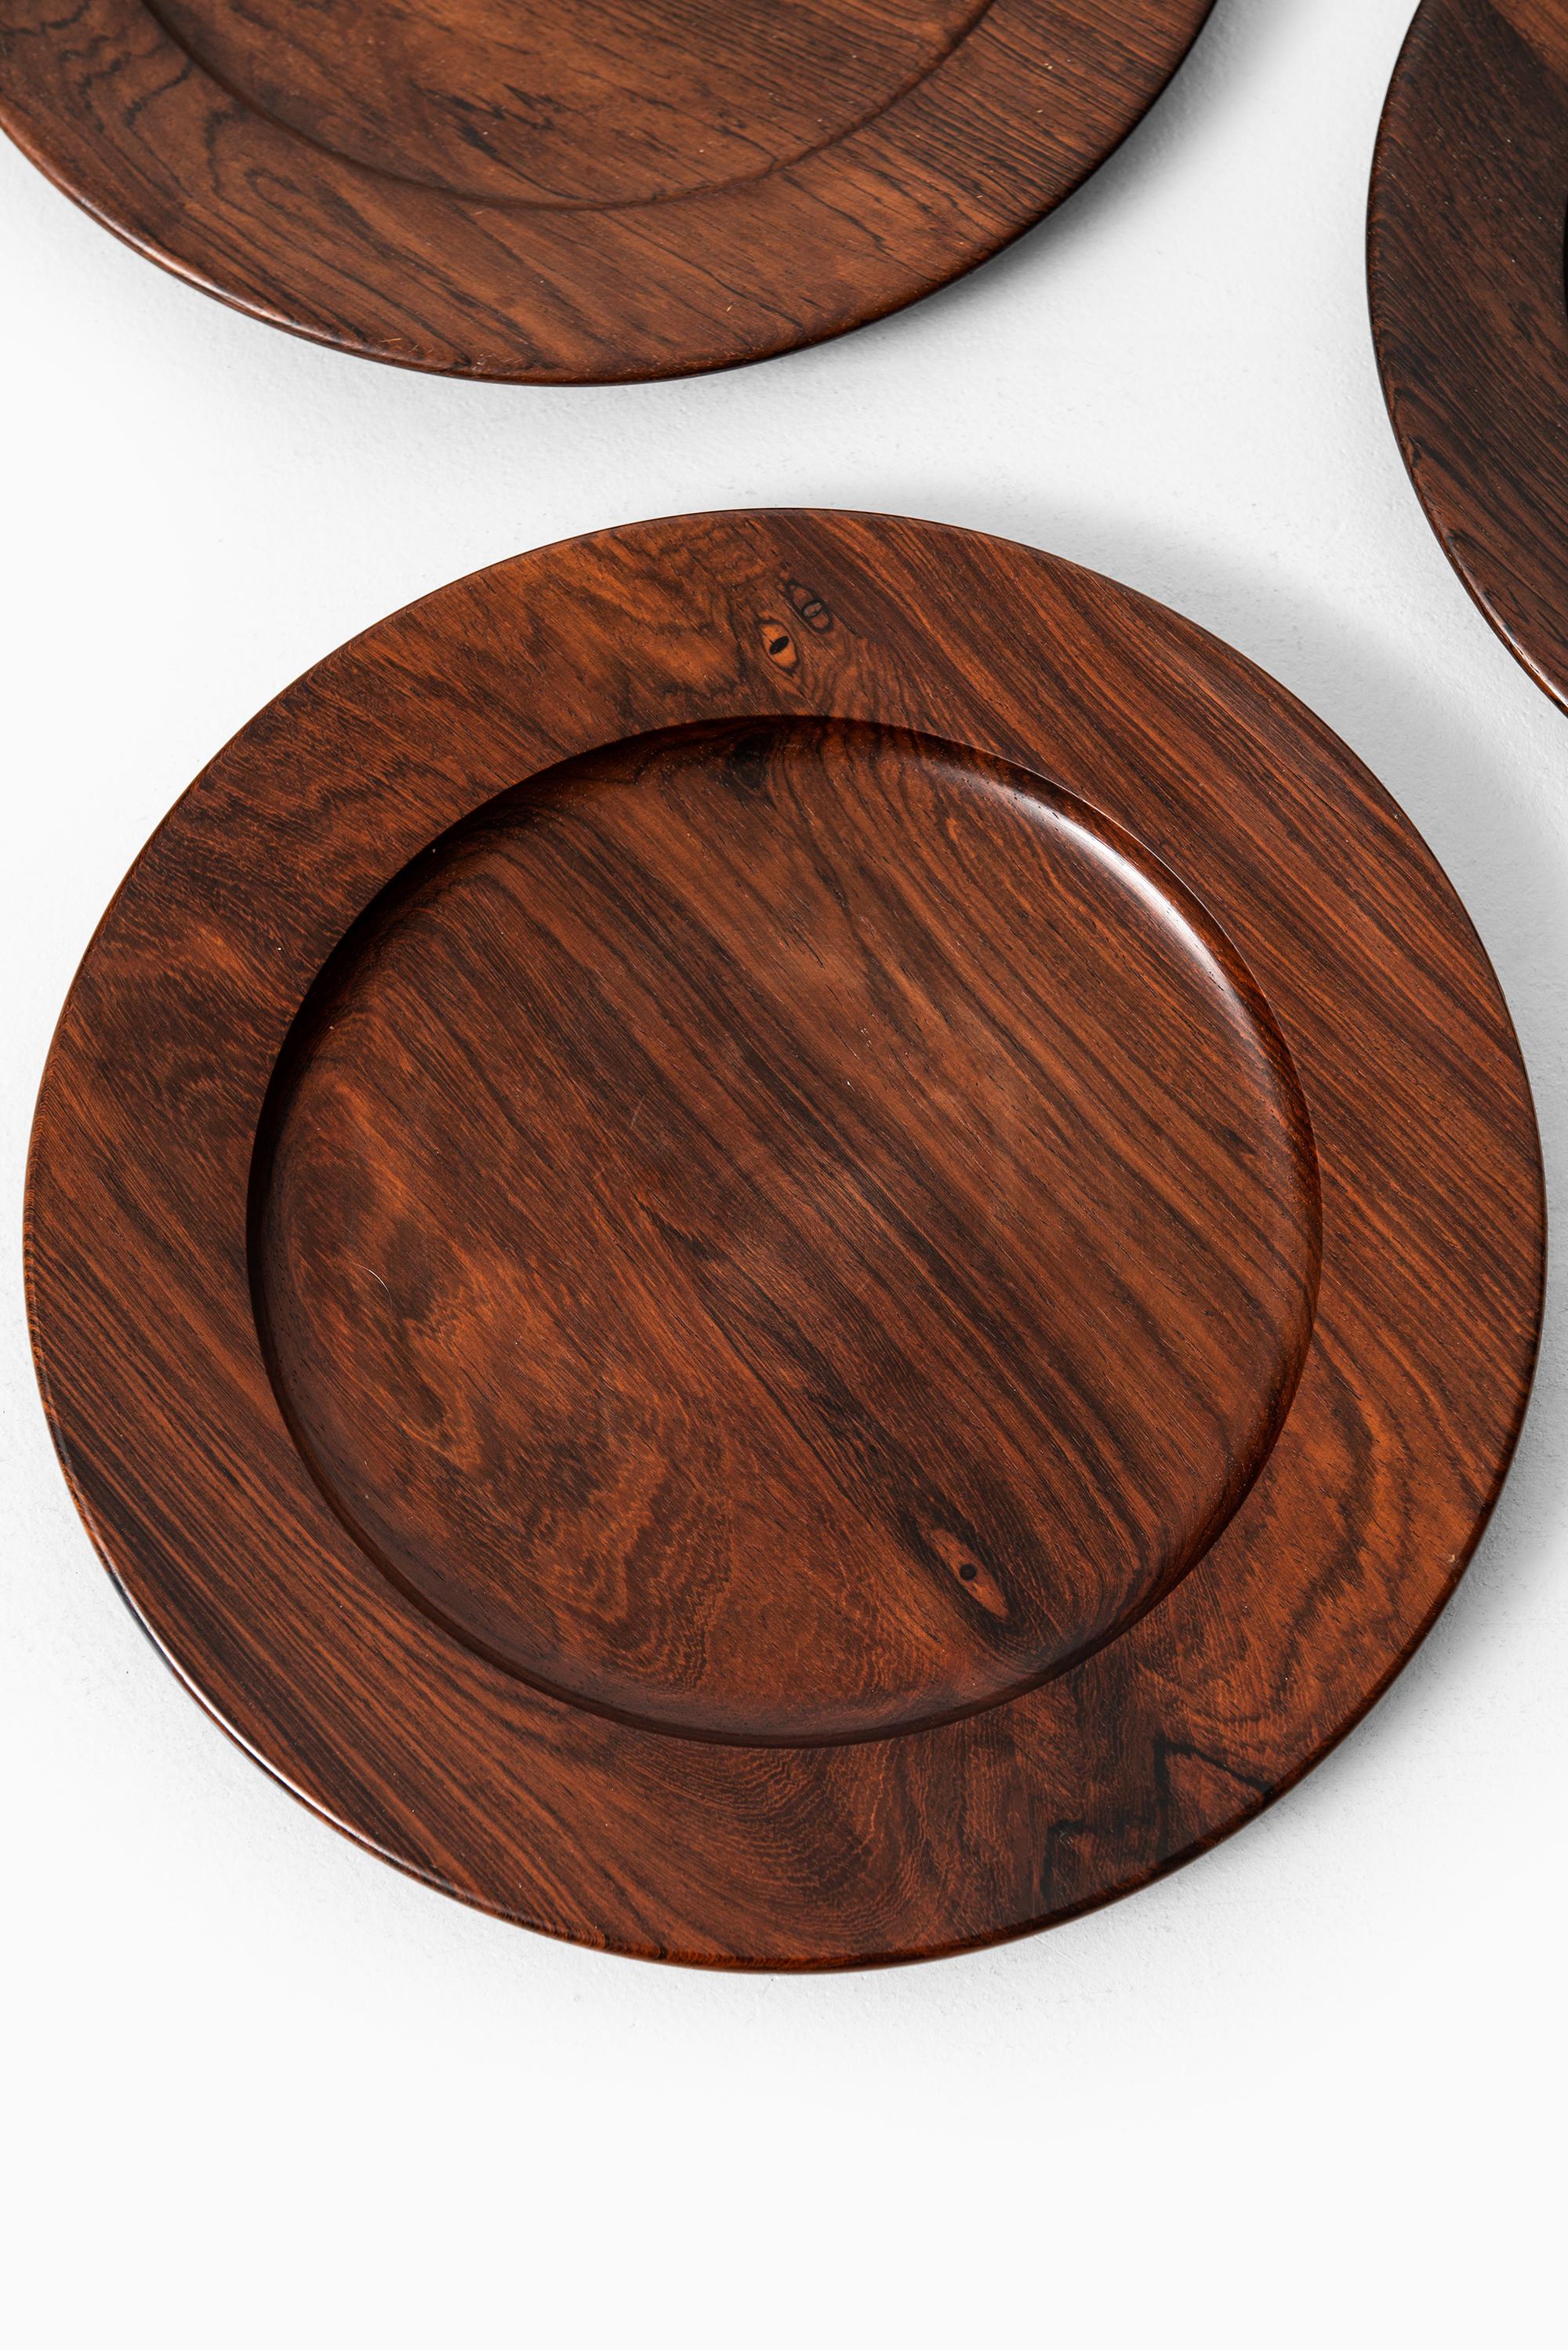 Danish Coaster Plates in Rosewood Attributed to Jens Quistgaard Produced in Denmark